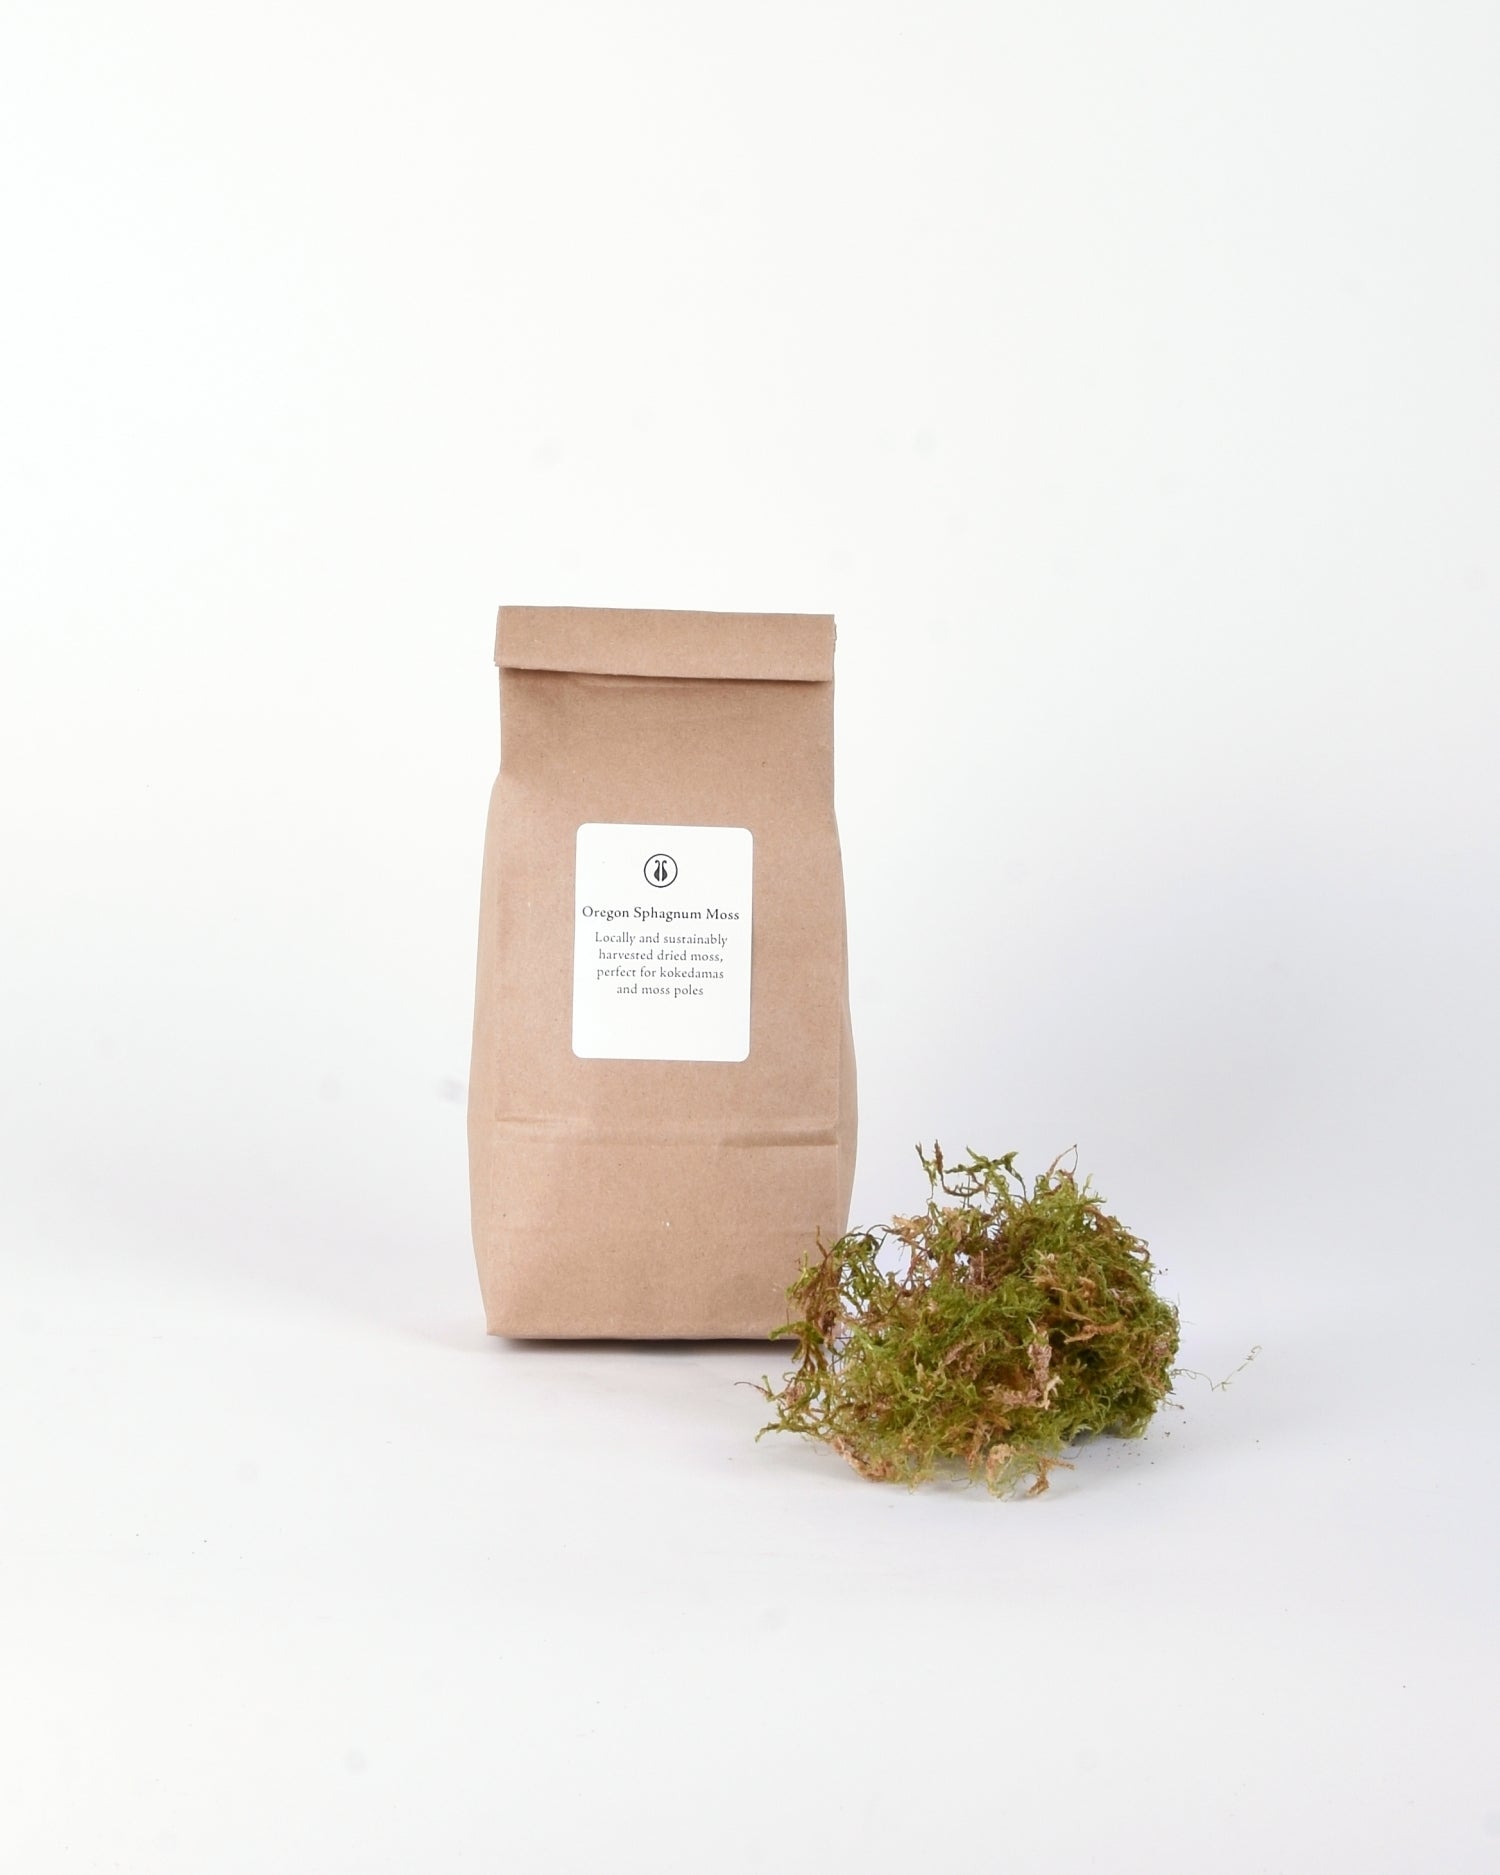 Brown compostable bag with Oregon Sphagnum Moss next to tuft of bright green moss